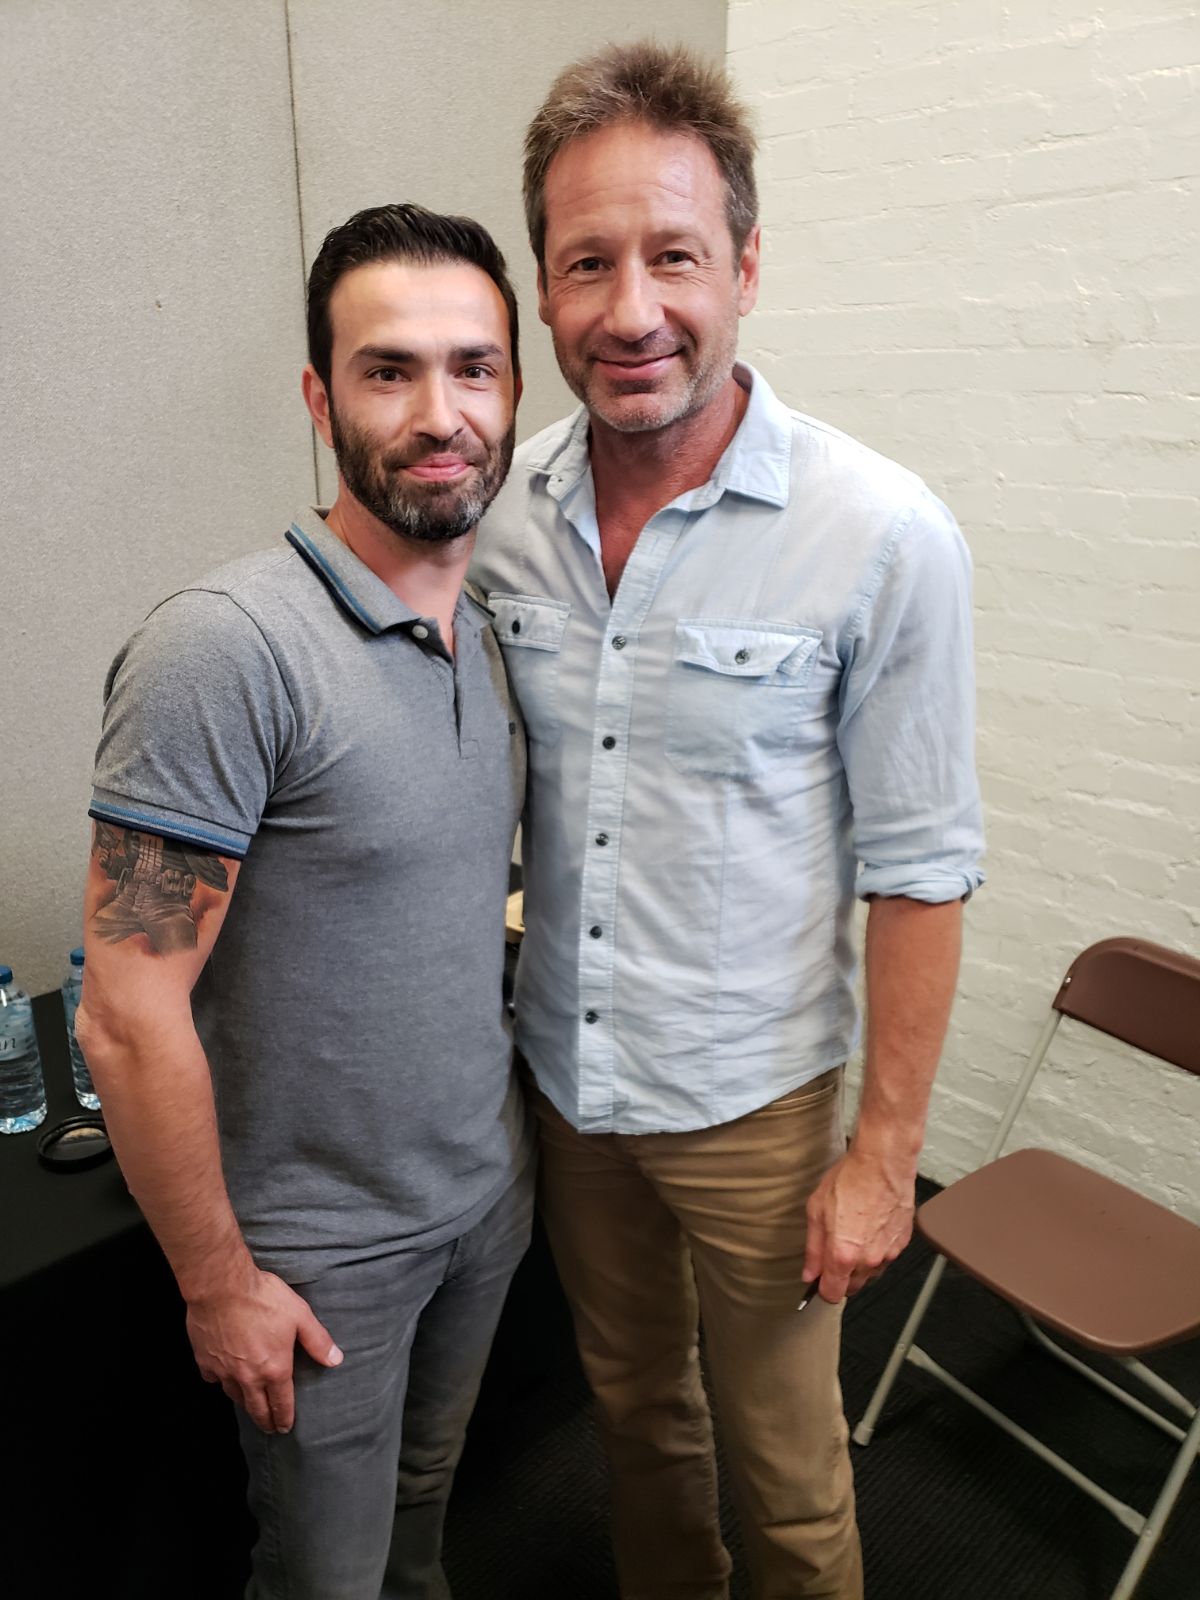 2018/07/29 - David at London Film & Comic Con at Olympia London - Page 5 DjdST8AW0AEjt3I